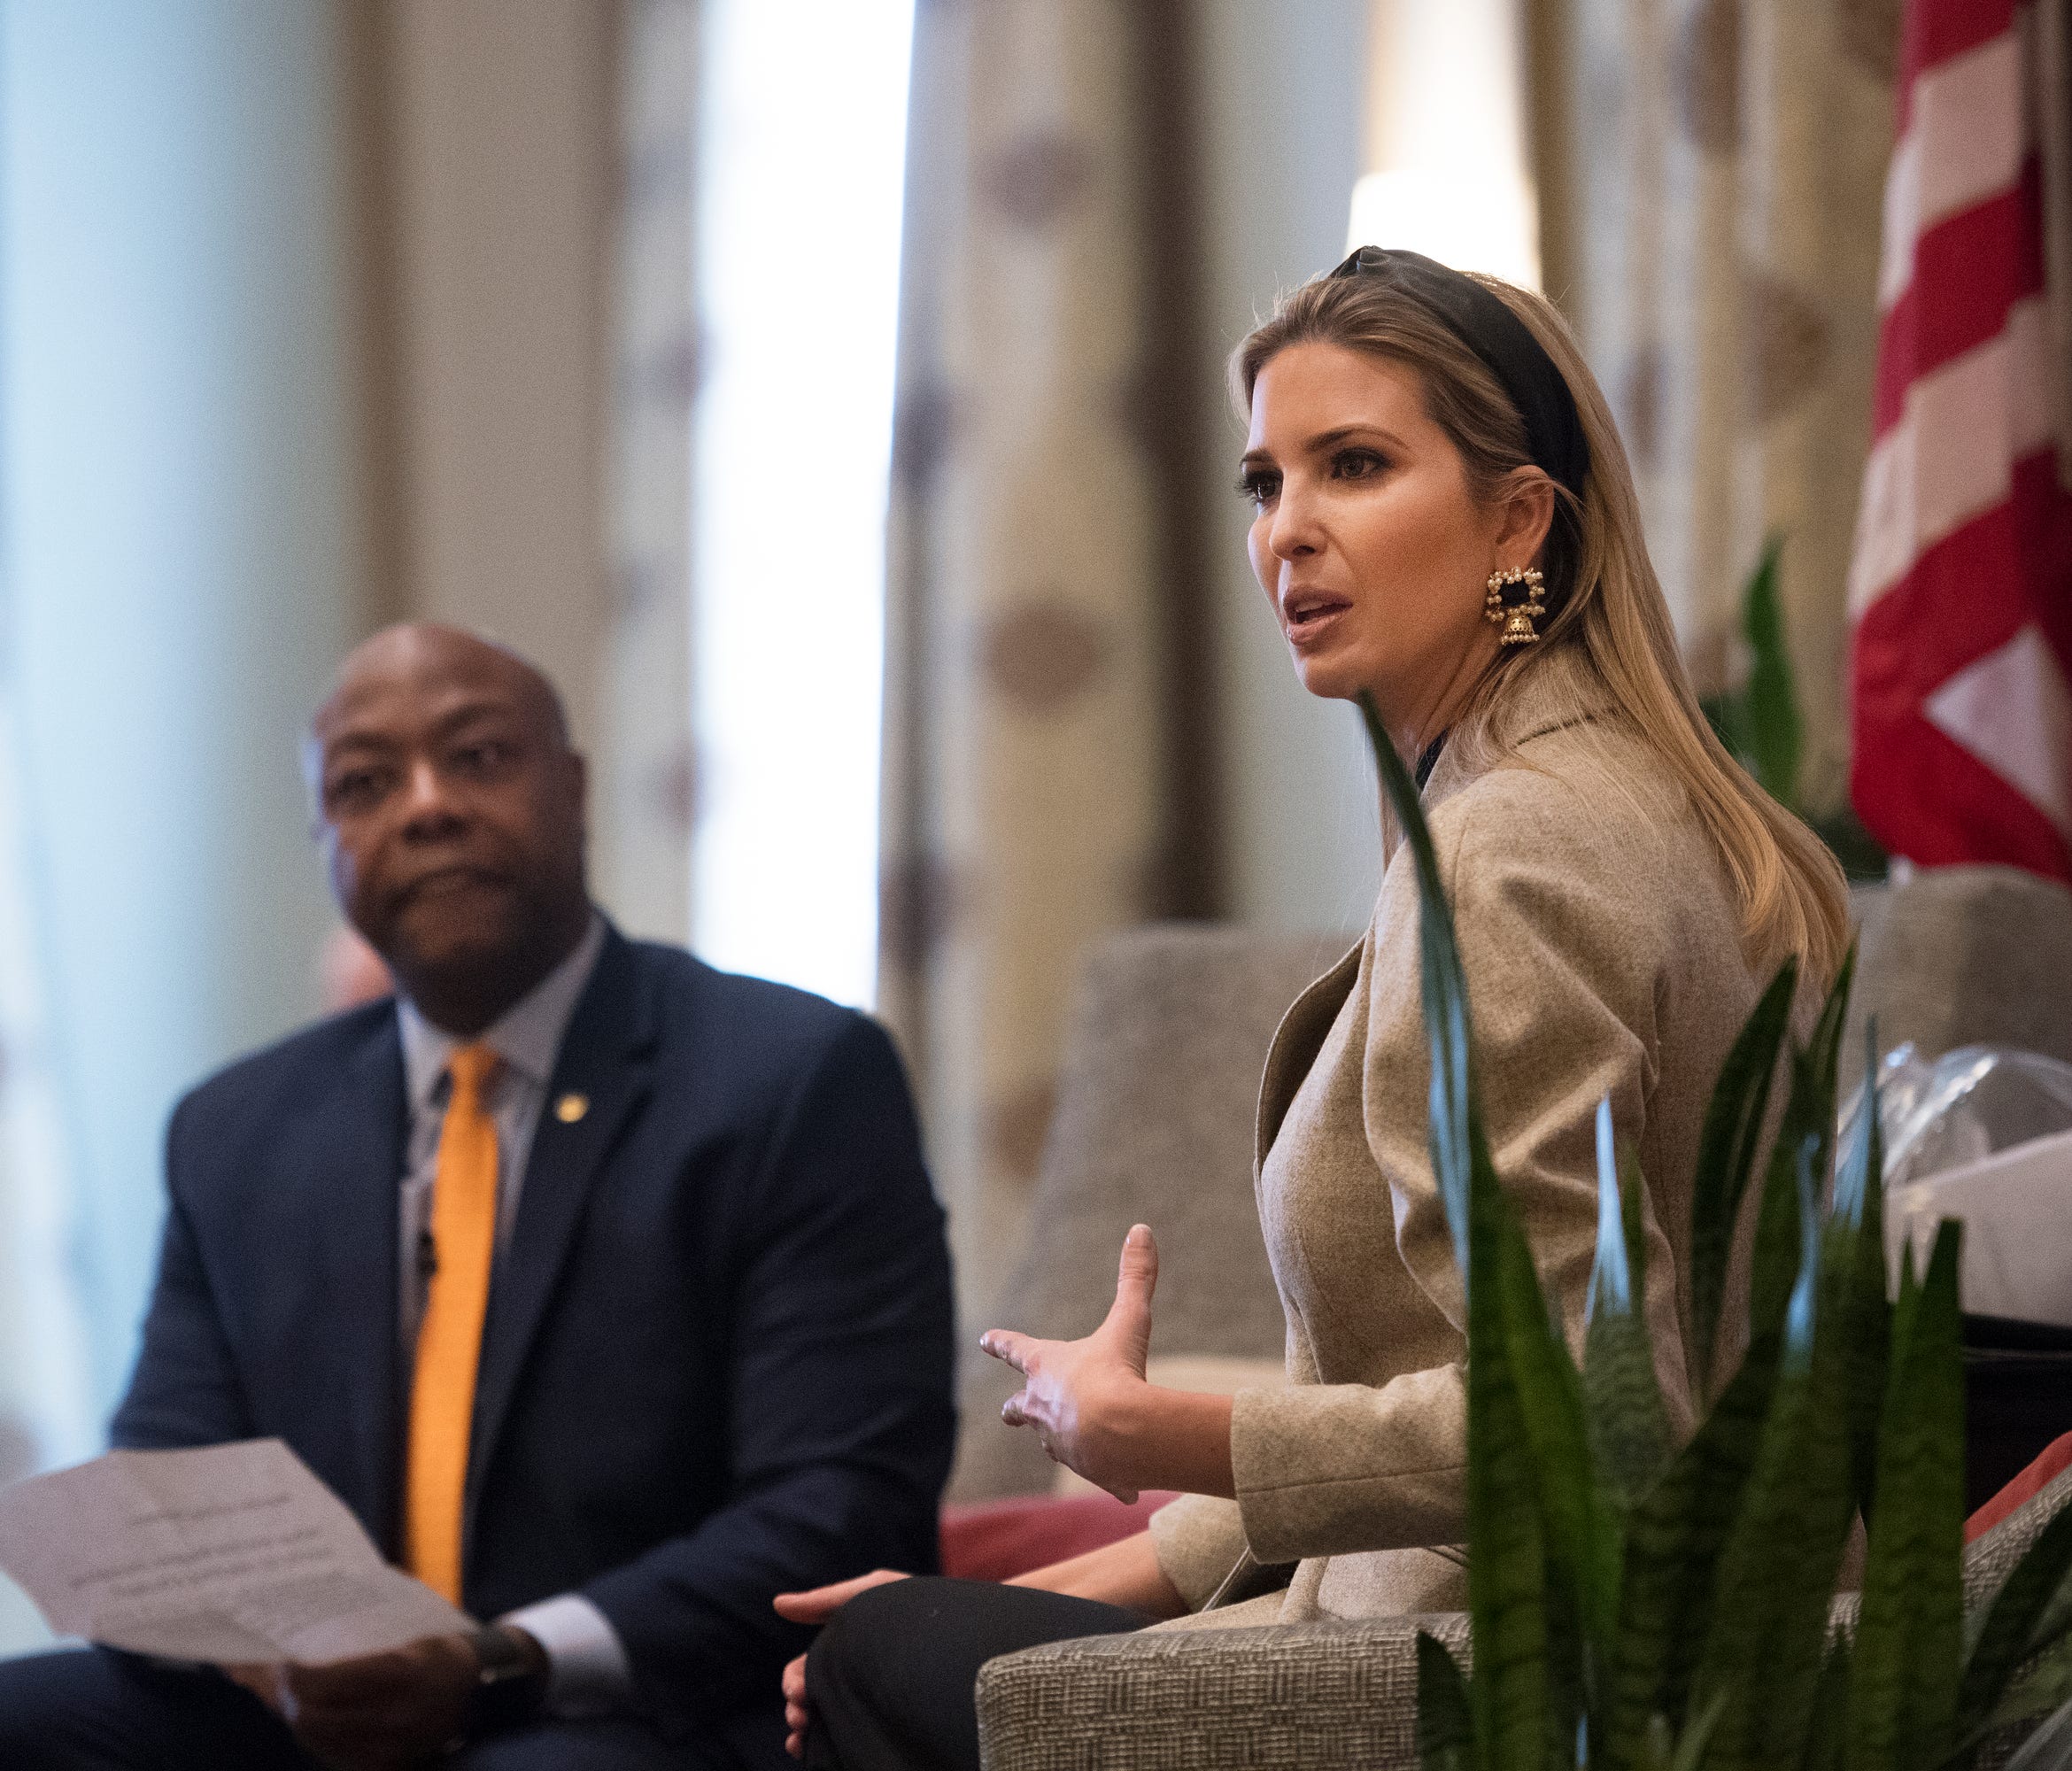 Ivanka Trump speaks during the Women in Leadership Forum at the Poinsett Hotel in Greenville on Friday, January 26, 2018.